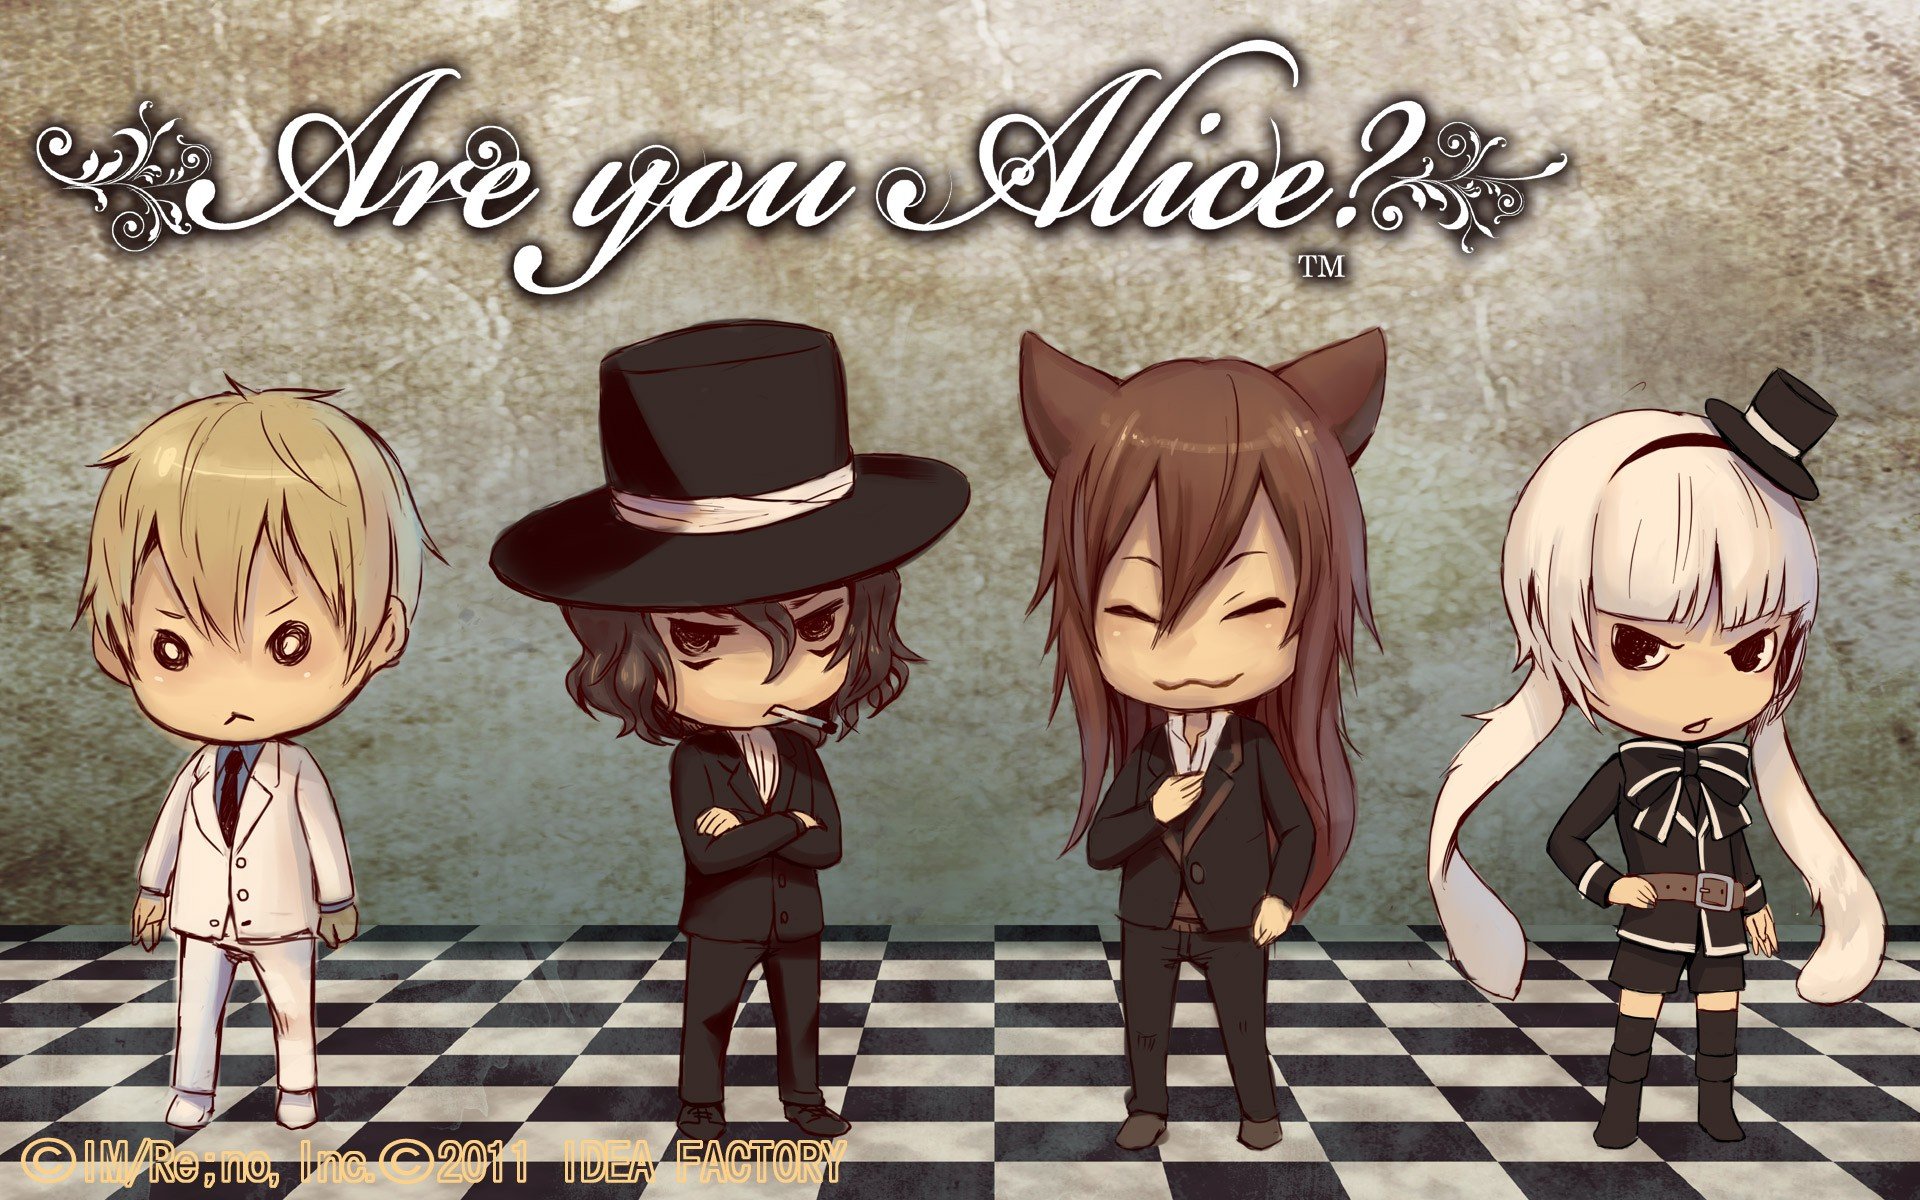 smoking, Chibi, Animal, Ears, Cat, Ears, Anime, Manga, Cigarettes, Bunny, Ears, Are, You, Alice , Alice,  are, You, Alice , Mad, Hatter,  are, You, Alice , Cheshire, Cat,  are, You, Alice , White, Rabbit,  are, Wallpaper